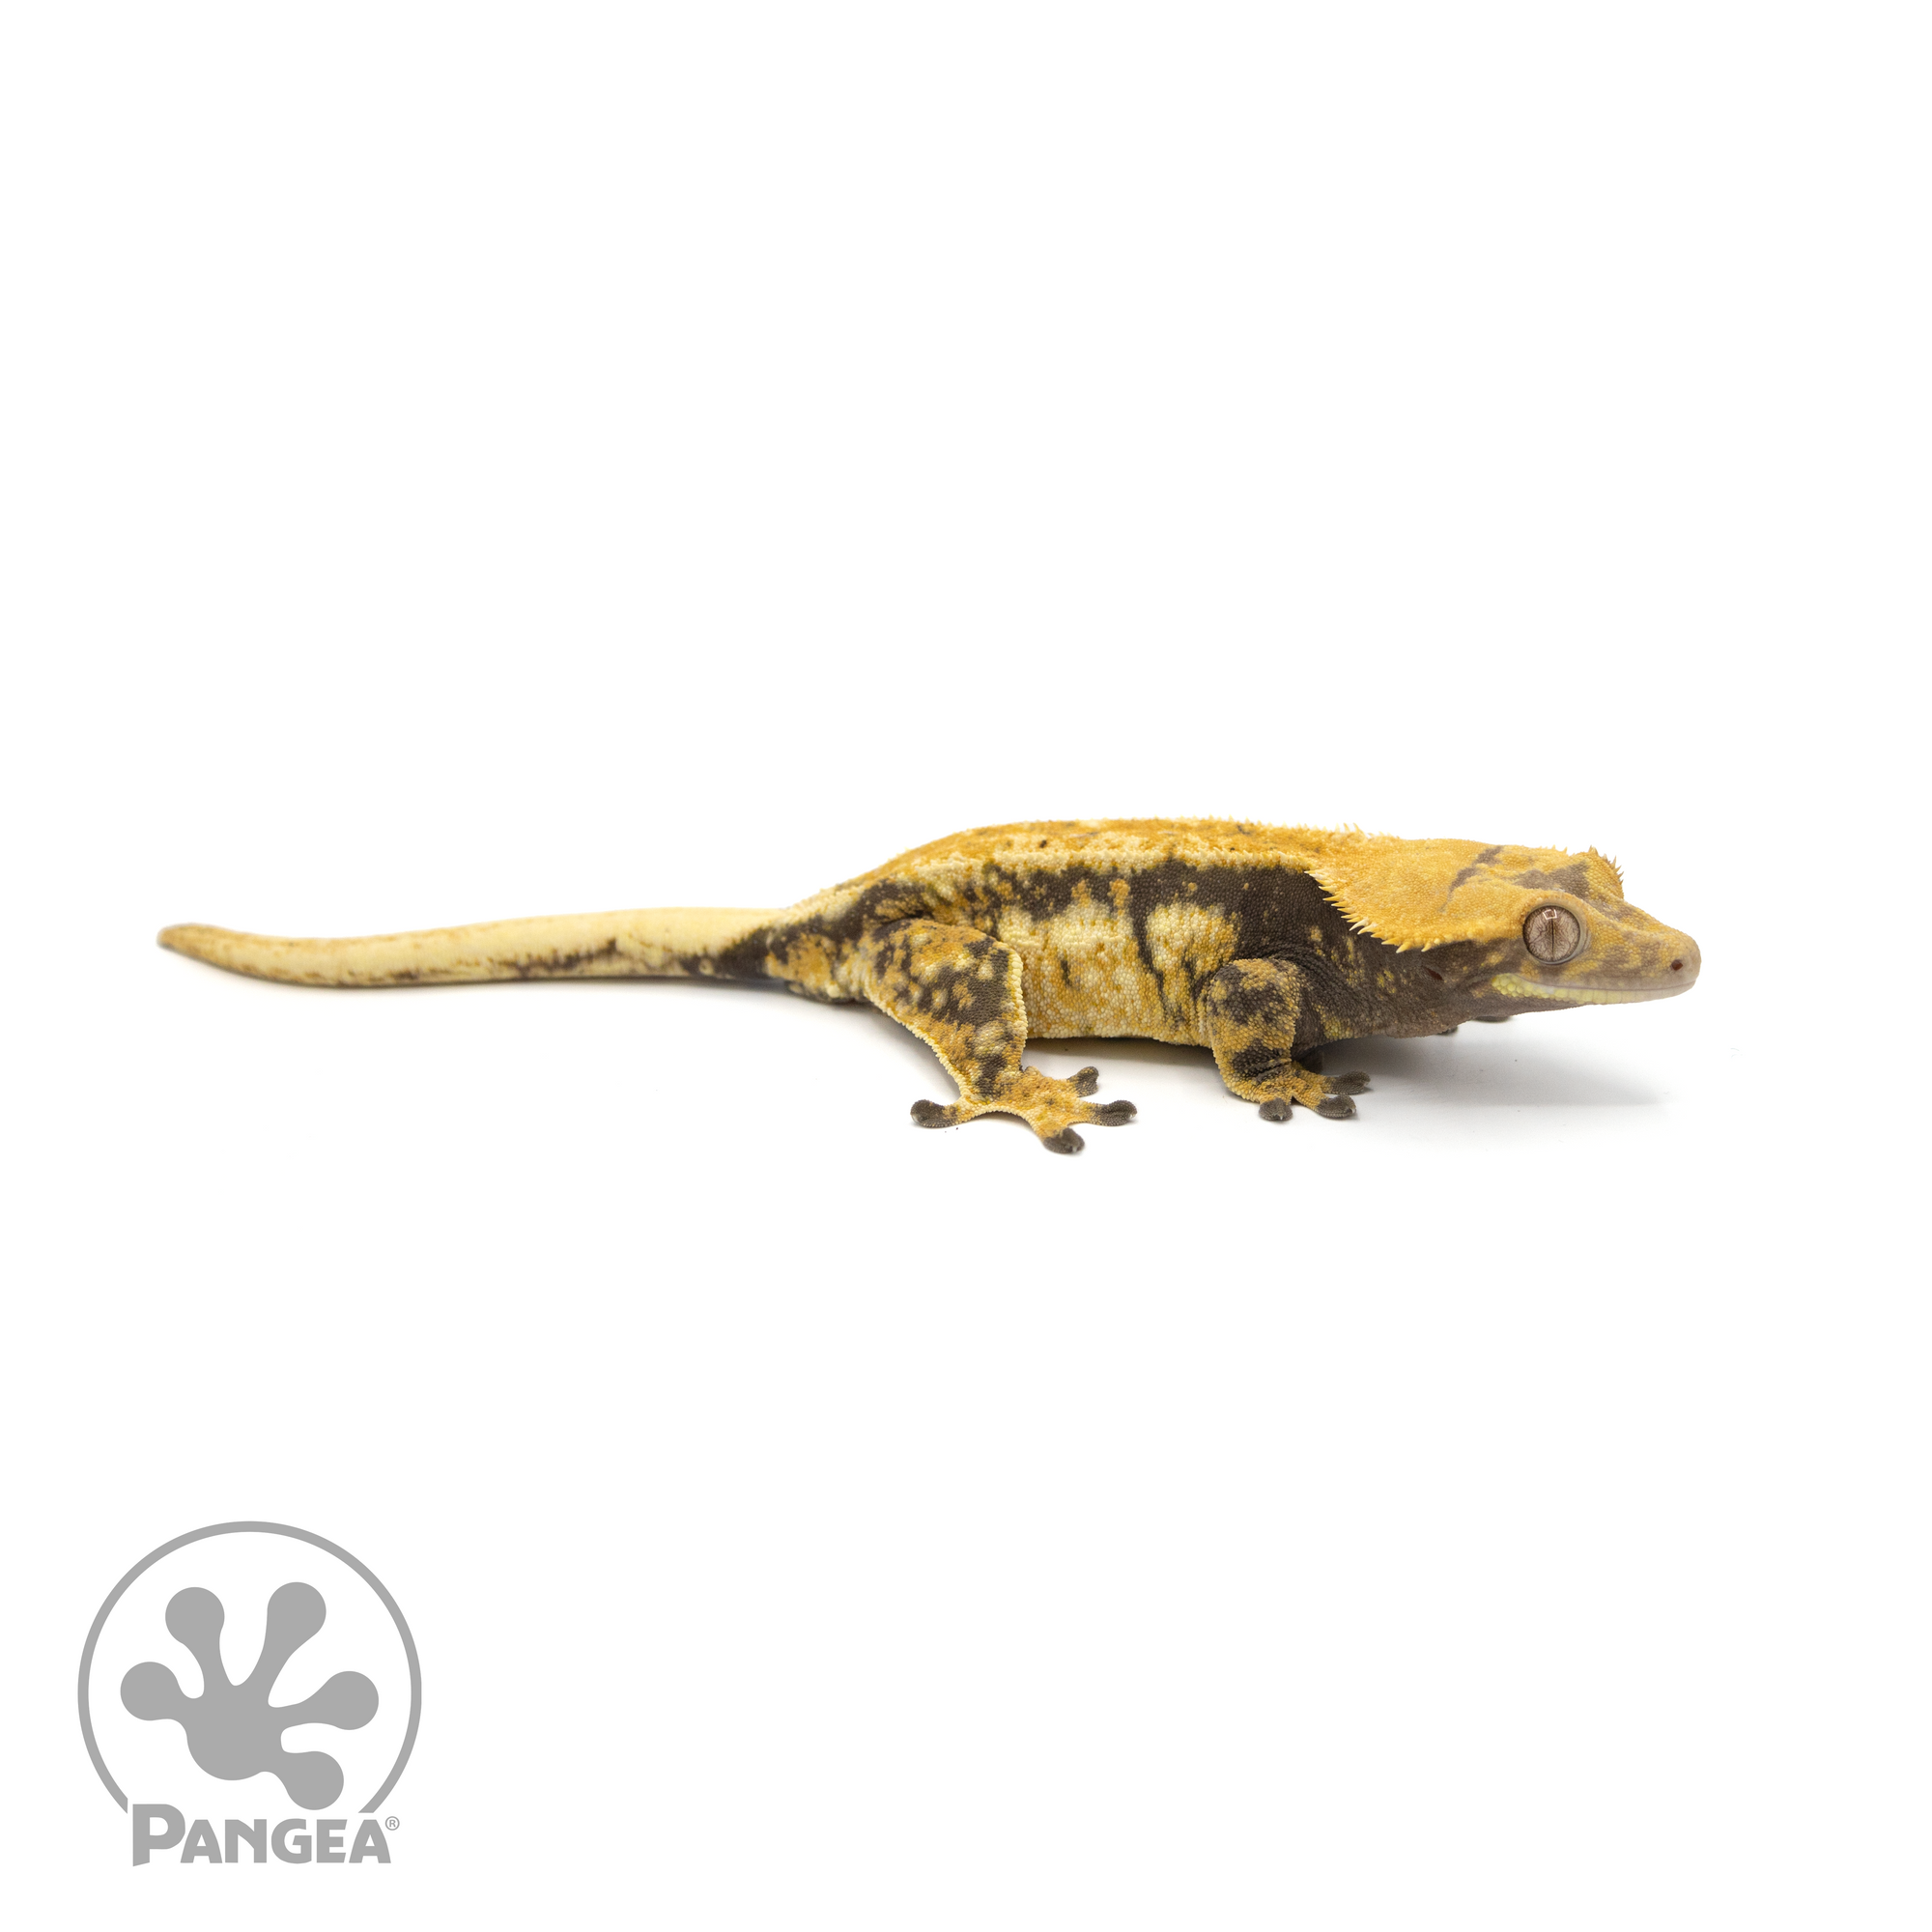 Female Tricolor Crested Gecko Cr-1411 looking right 